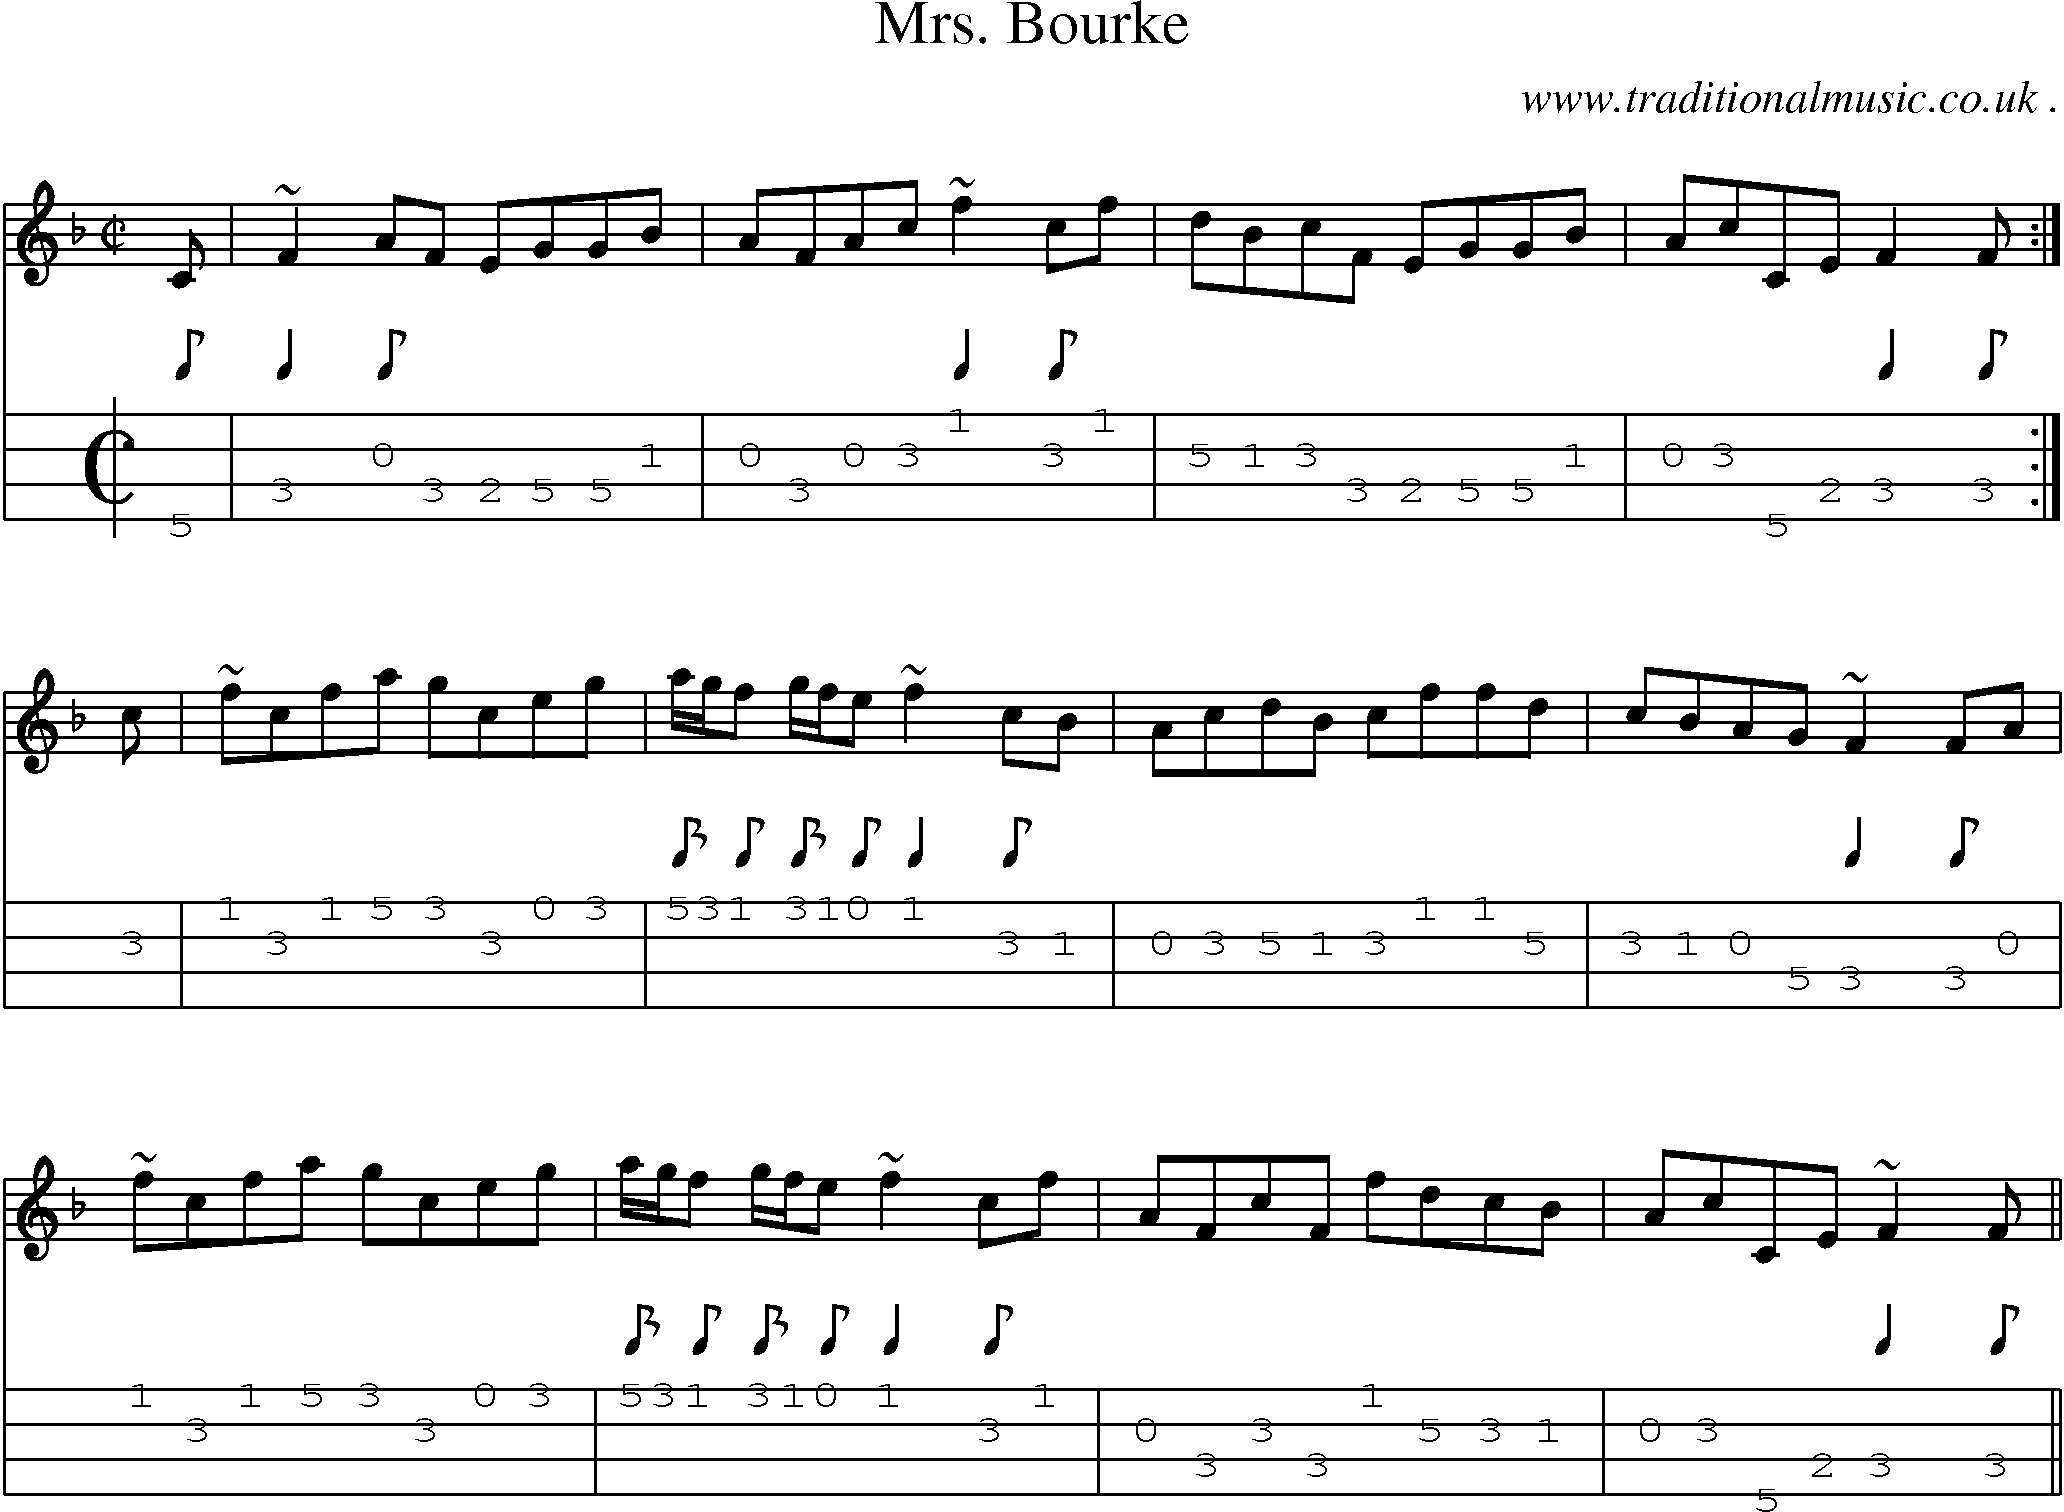 Sheet-music  score, Chords and Mandolin Tabs for Mrs Bourke